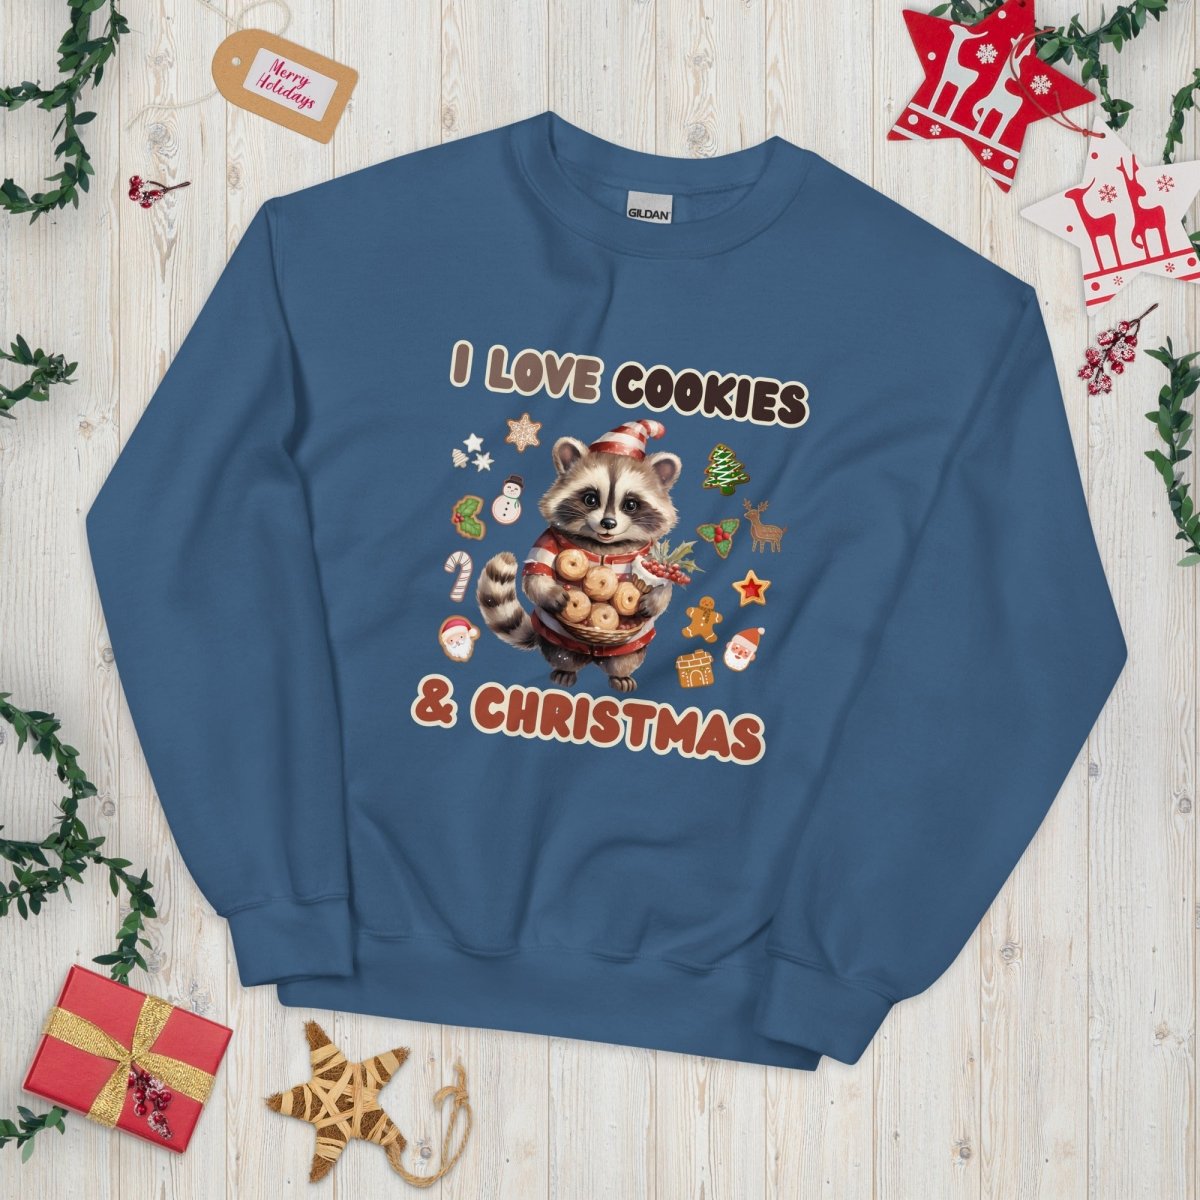 I love Christmas Cookies Pullover - High Quality Funny Unisex Sweater, Holiday Sweatshirt, Christmas Vacation Pullover, Cute Raccoon - Everything Pixel